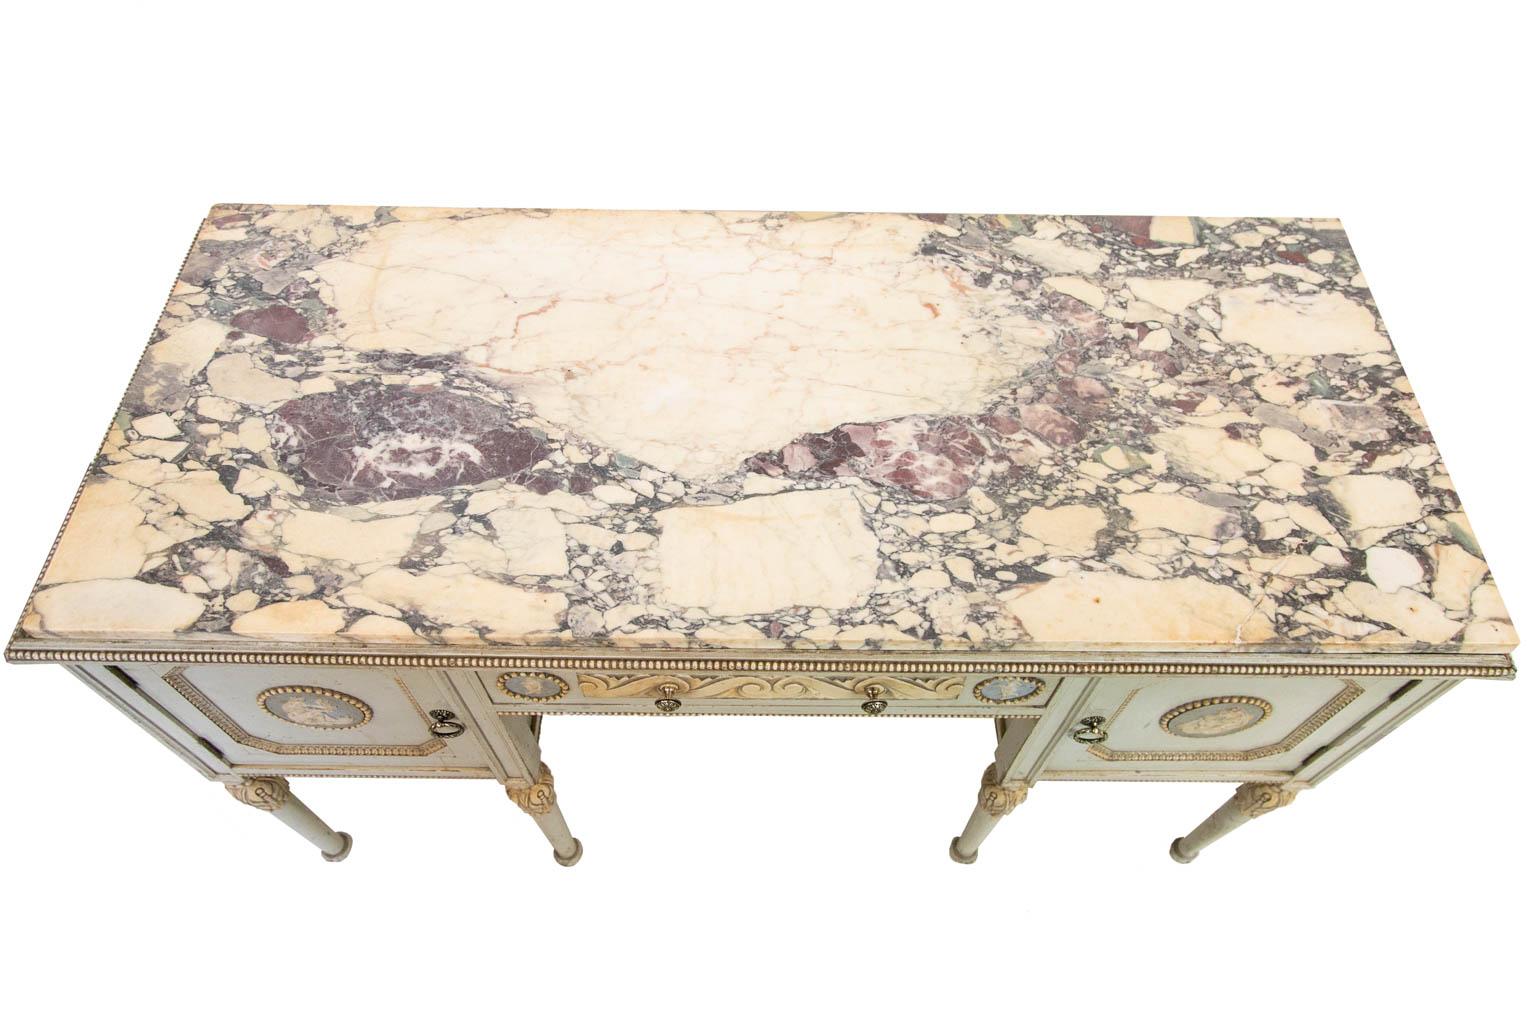 This marble top console table is painted mahogany. The top is bordered by repeating bead molding. The doors and drawers have applied jasperware panels with classical figures and cherubs surrounded by beadwork frame. The center door has stylized left